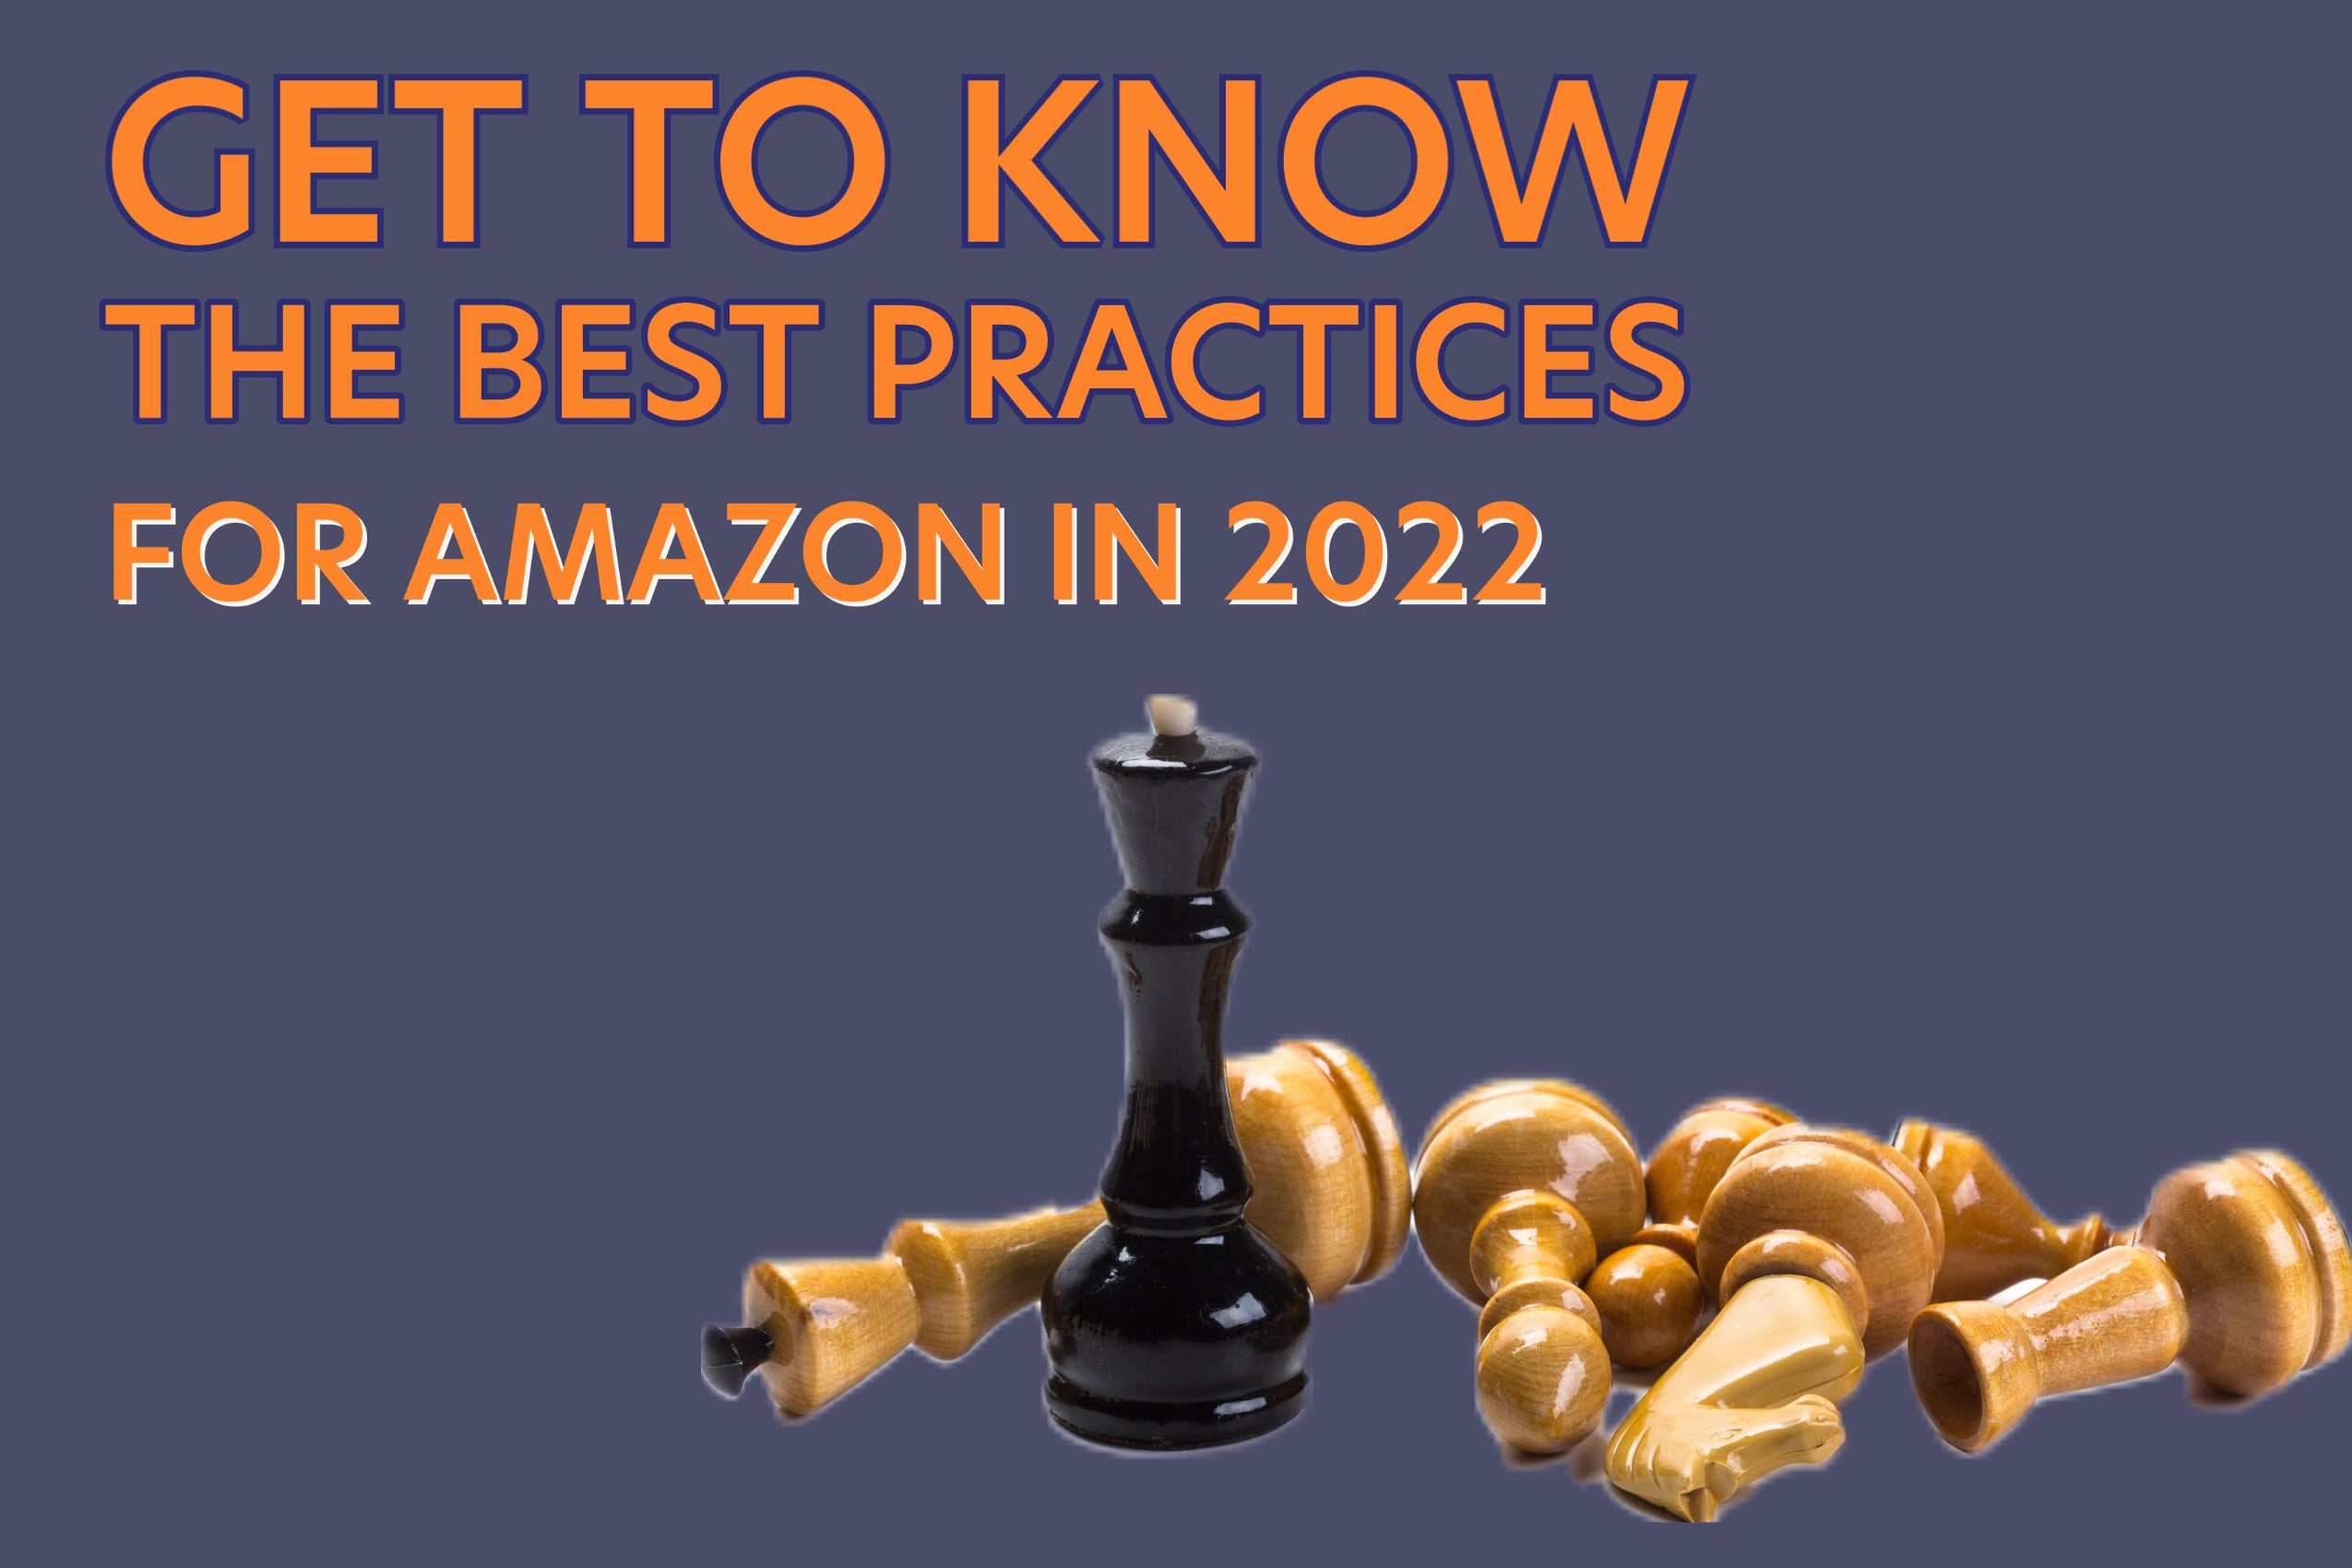 Get To Know The Best Practices For Amazon In 2022